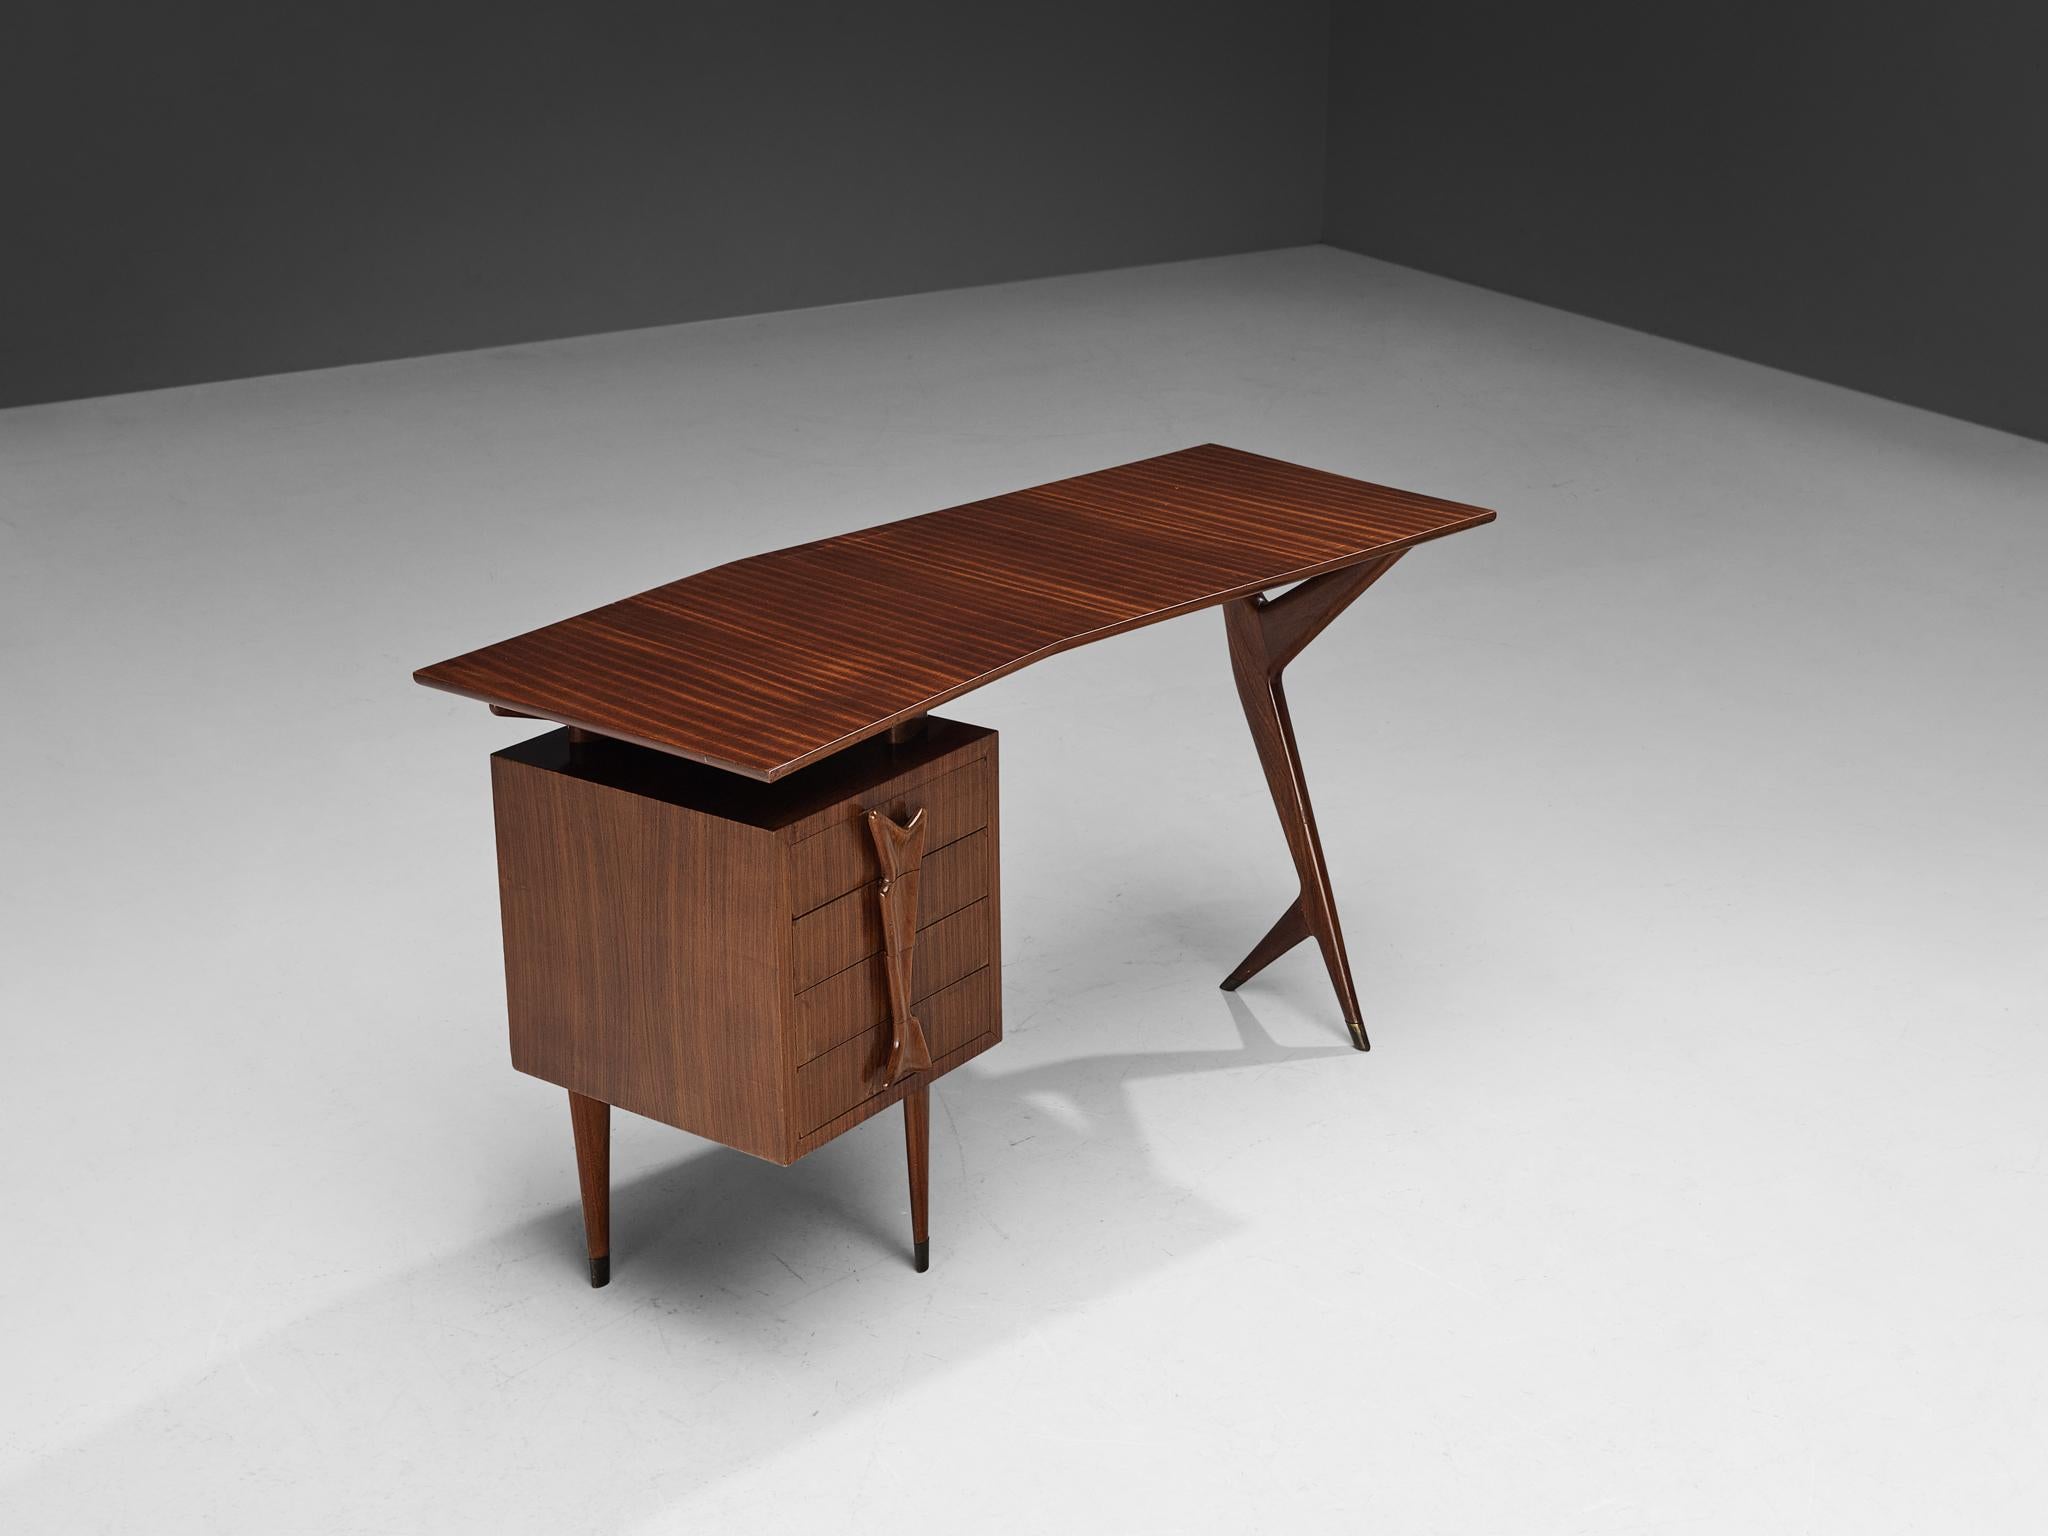 Small writing desk, mahogany, brass, Italy, 1950s.

Sculptural Italian desk with beautiful curved top. This writing table is both refined and elegant in every way. The boomerang shape of the tabletop gives the piece a playful yet elegant character.